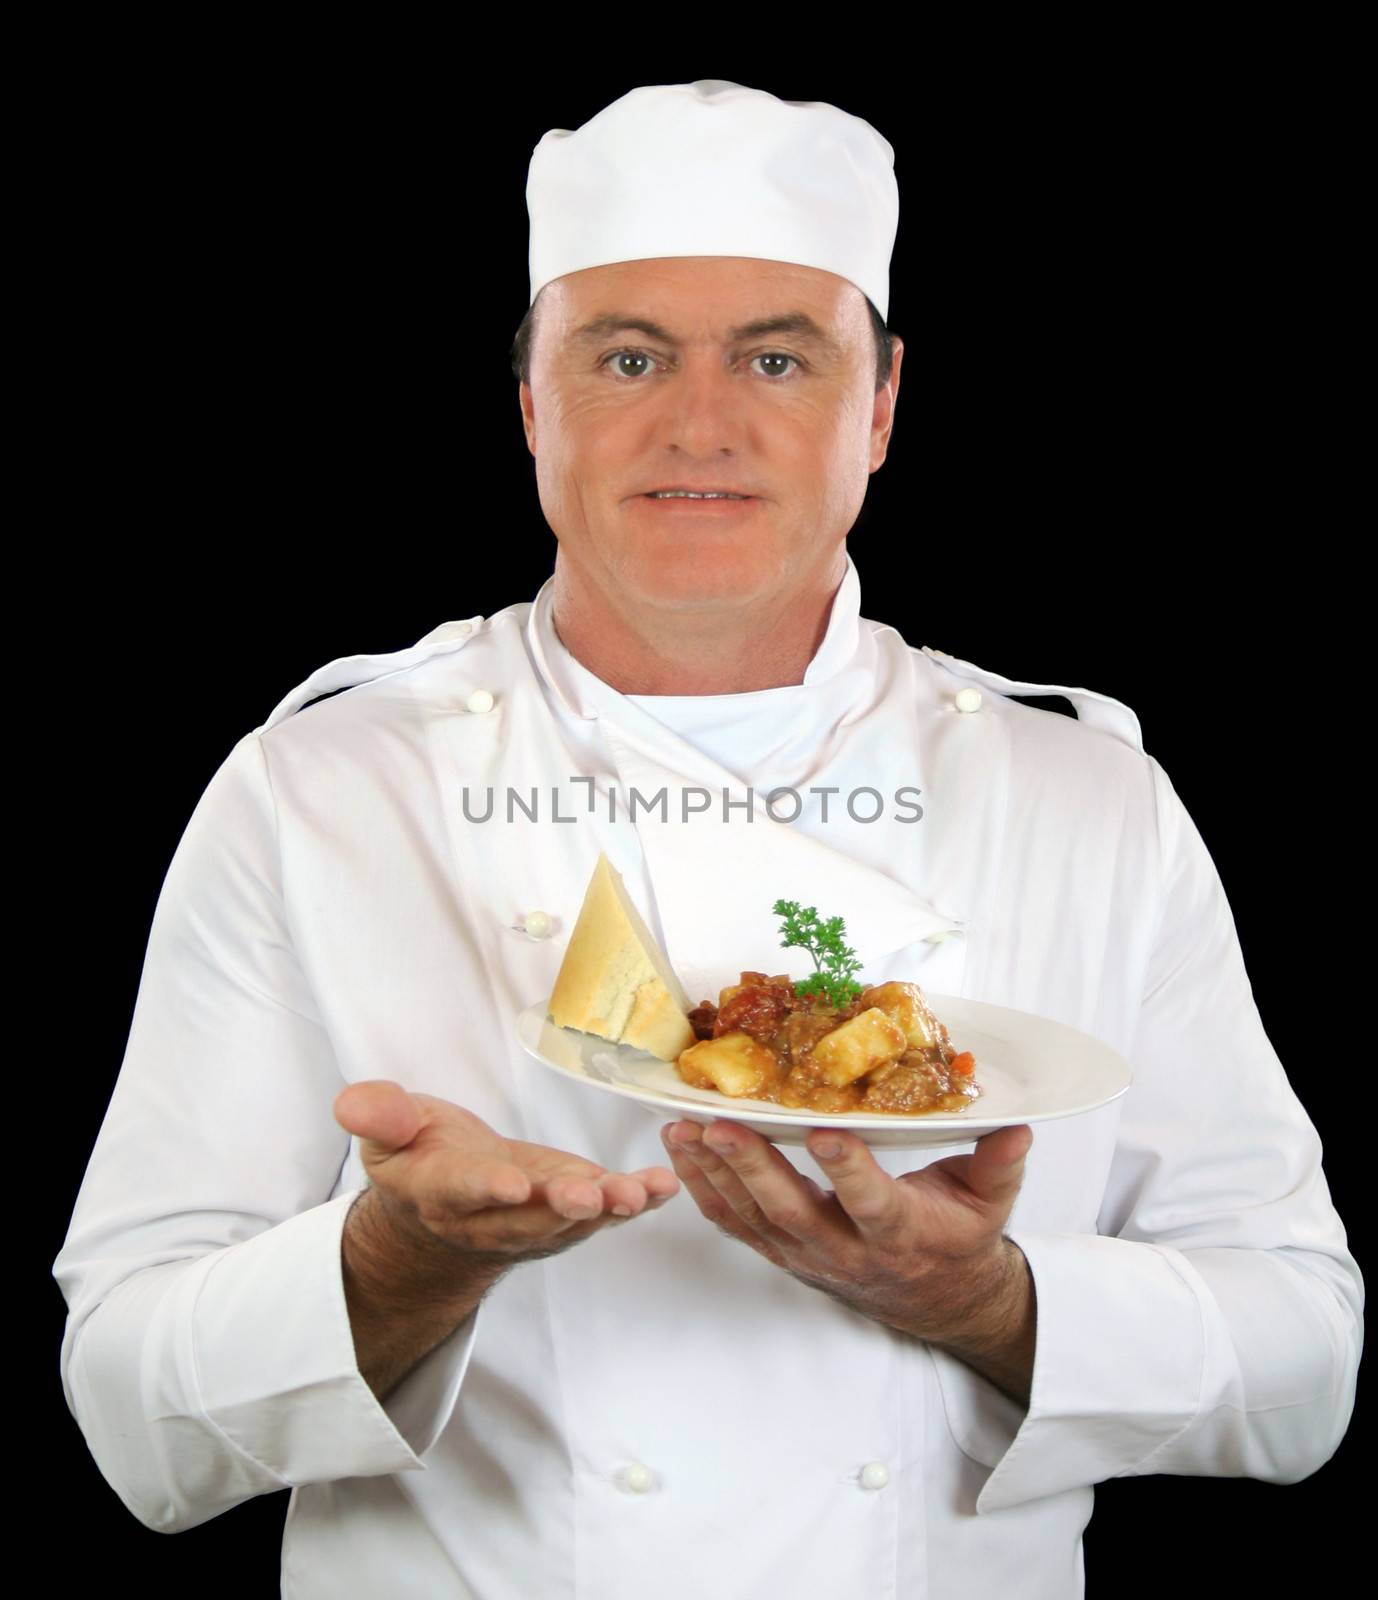 Chef presents freshly cooked meal to camera.